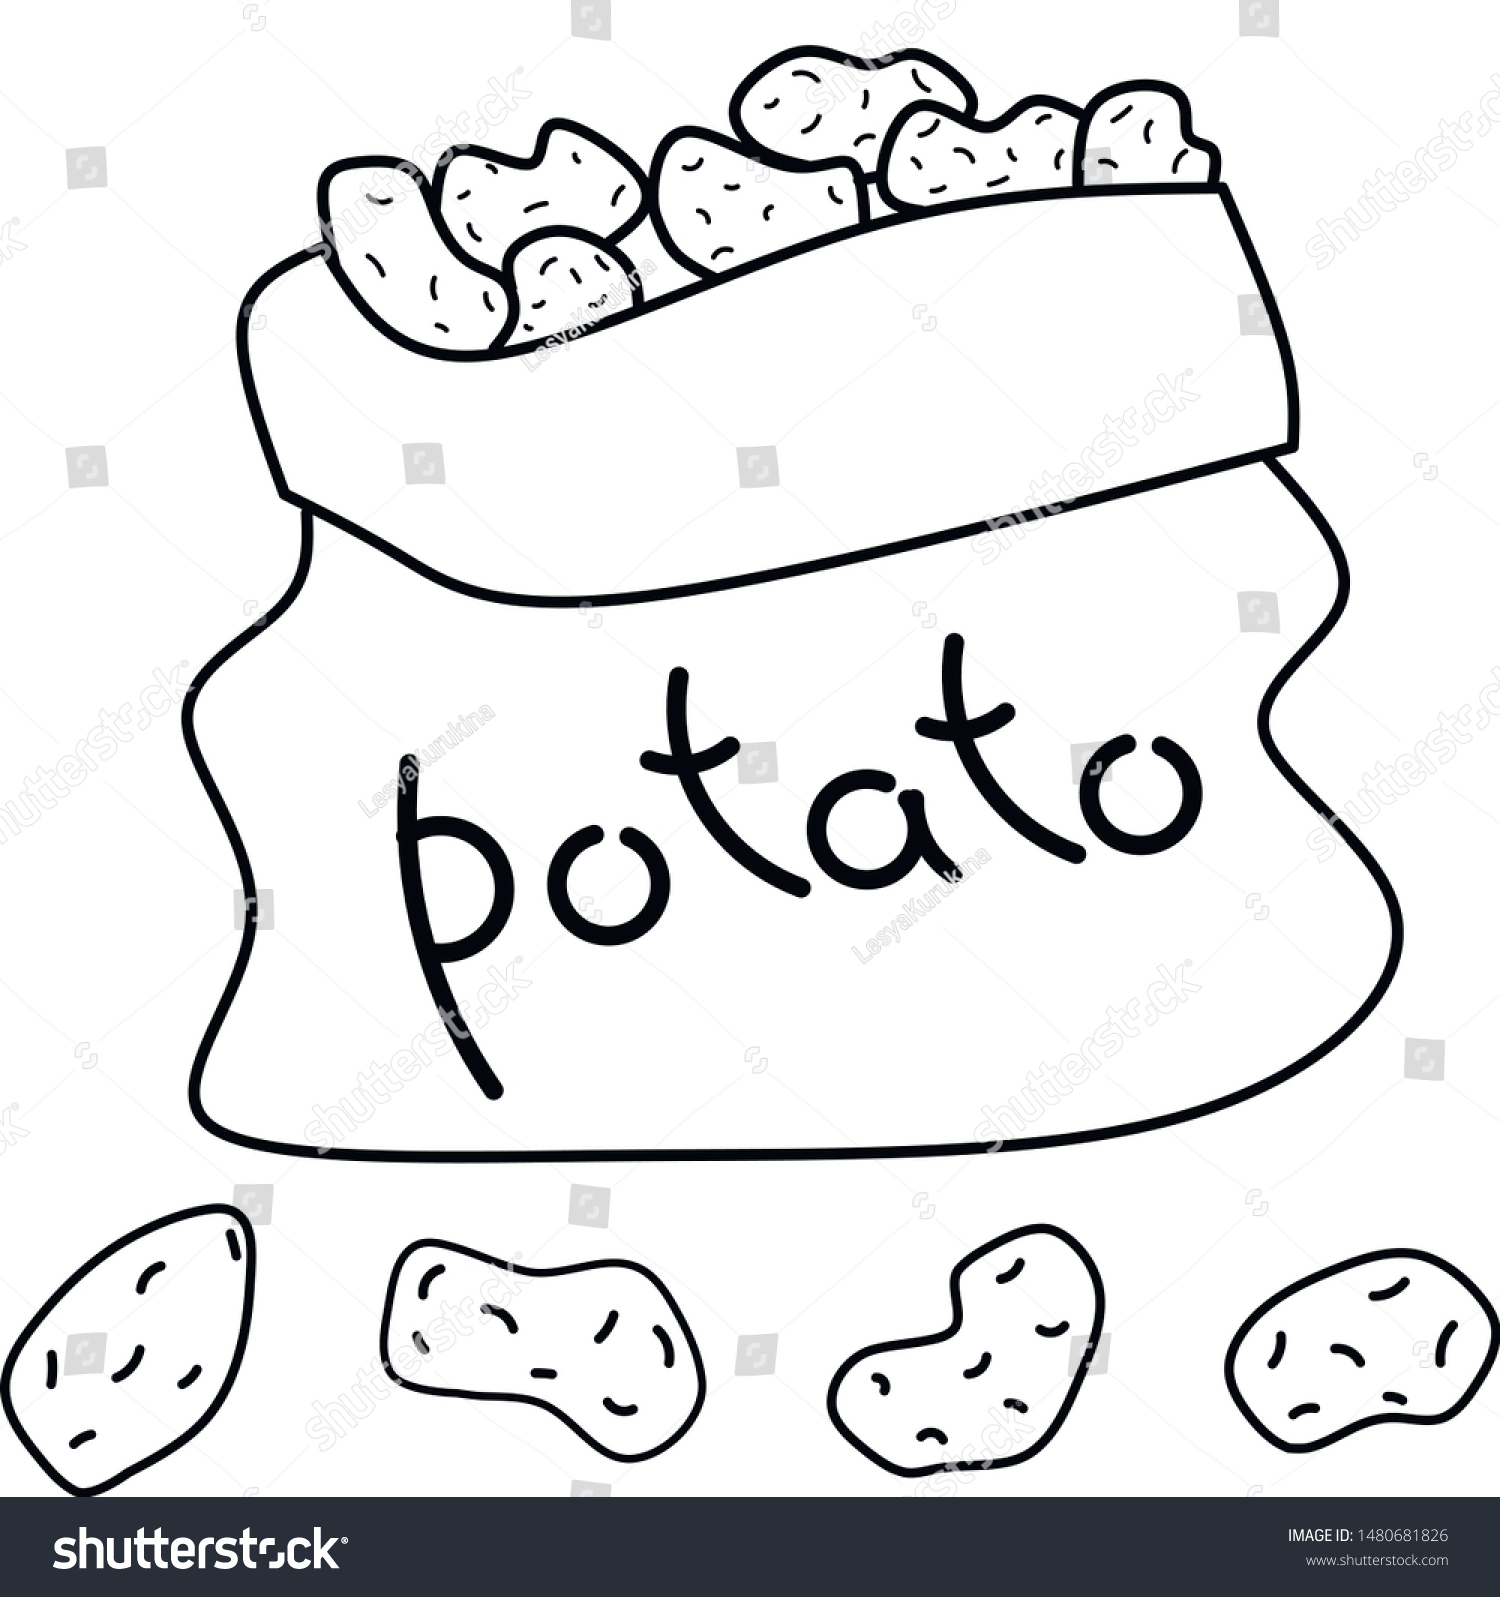 Bag Potatoes Outline Illustration Isolated Stock Vector (Royalty Free ...